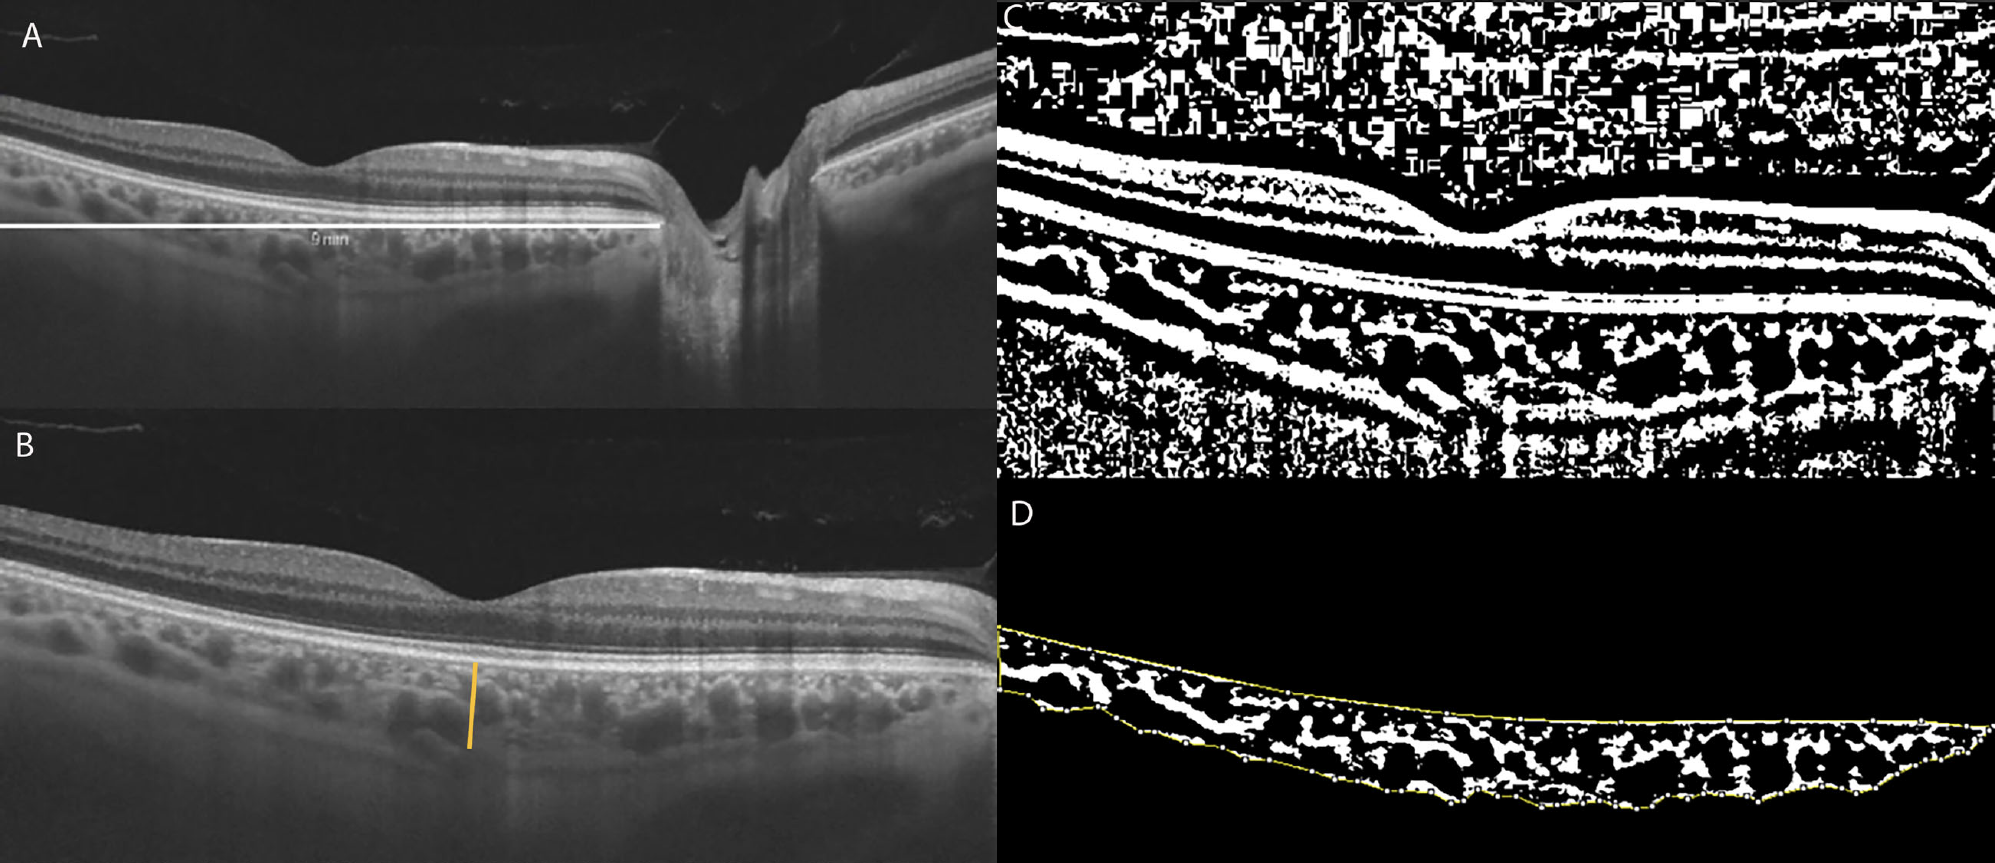 CVI is calculated by demarcating a 9mm horizontal B-scan at the fovea (fig. A, white line) and the subfoveal choroidal thickness (fig. B, orange line). The image is then binarized (fig. C), with the dark pixels representing the vessels’ luminal area and the white pixels the stromal area. Finally, the total choroidal area—the space between the yellow lines—is isolated with the RPE representing the anterior boundary and the scleral-choroidal interface as the posterior boundary, across the entire length of the scan. Total luminal area divided by total choroidal area represents the CVI, a measure of the structure’s vascular capacity. The study in question found a lower CVI in DR patients, indicating that low perfusion and proliferative changes are the major pathological effects in the choroid.